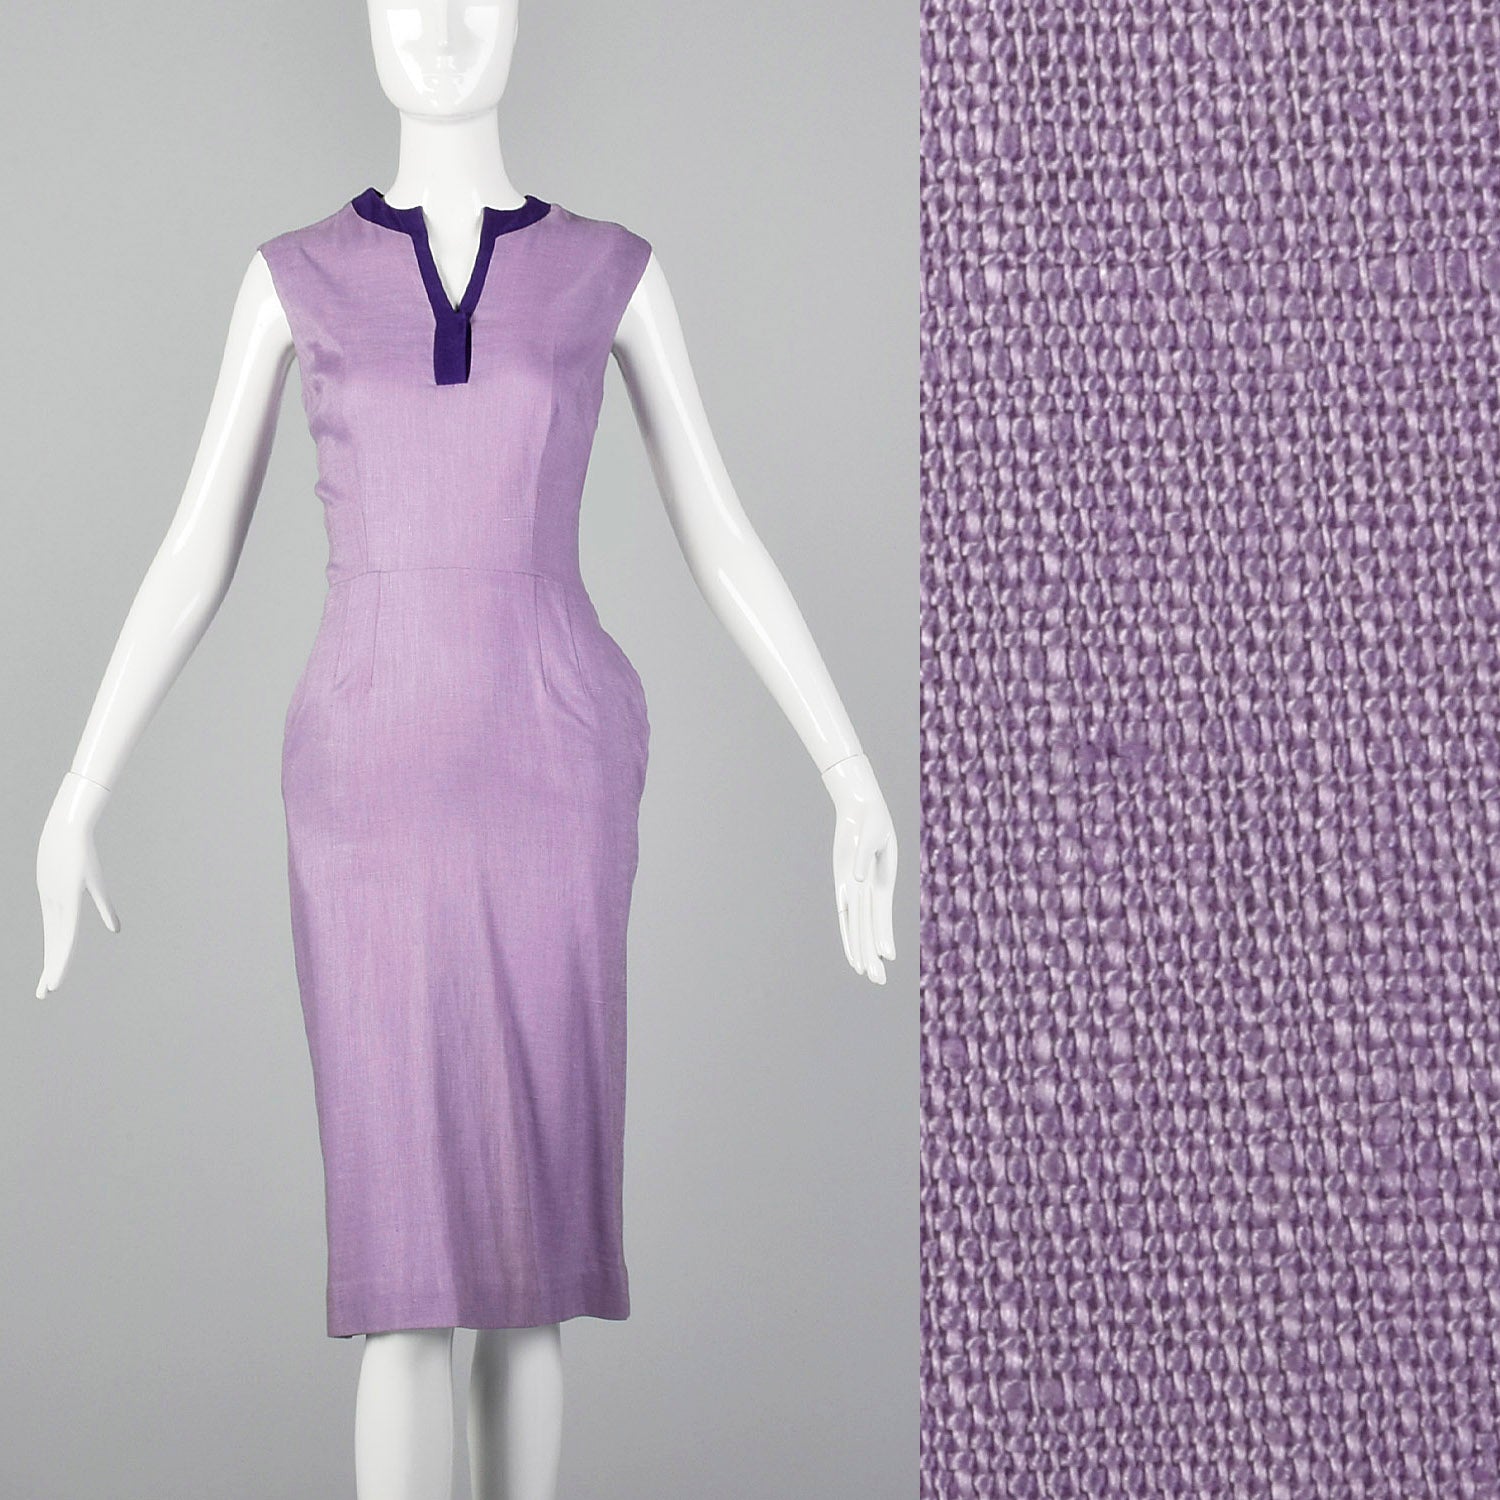 1960s Sleeveless Purple Dress with Fitted Waist